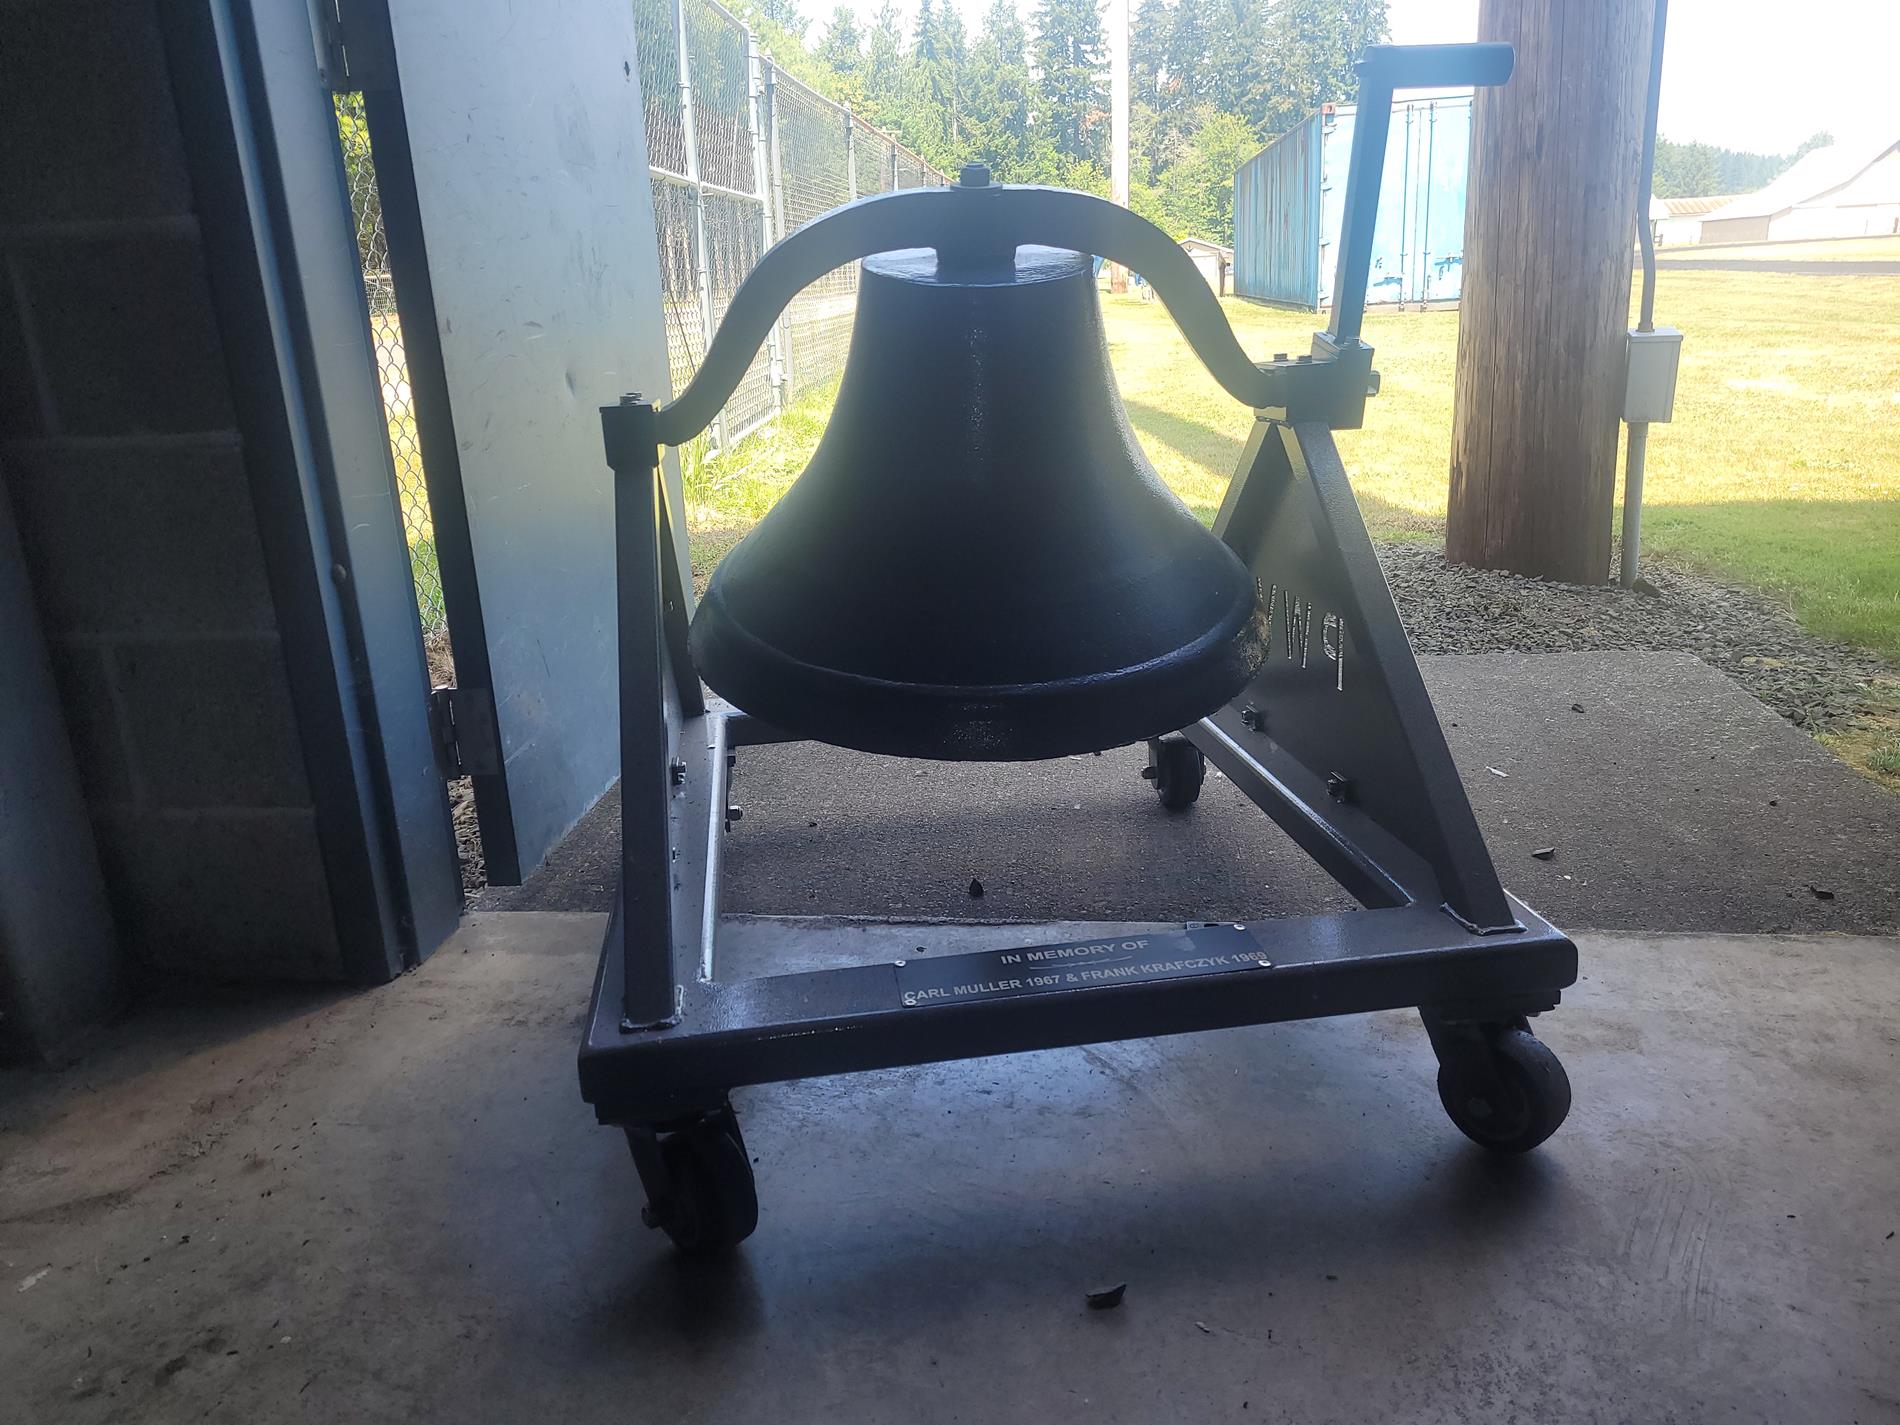 Football game bell